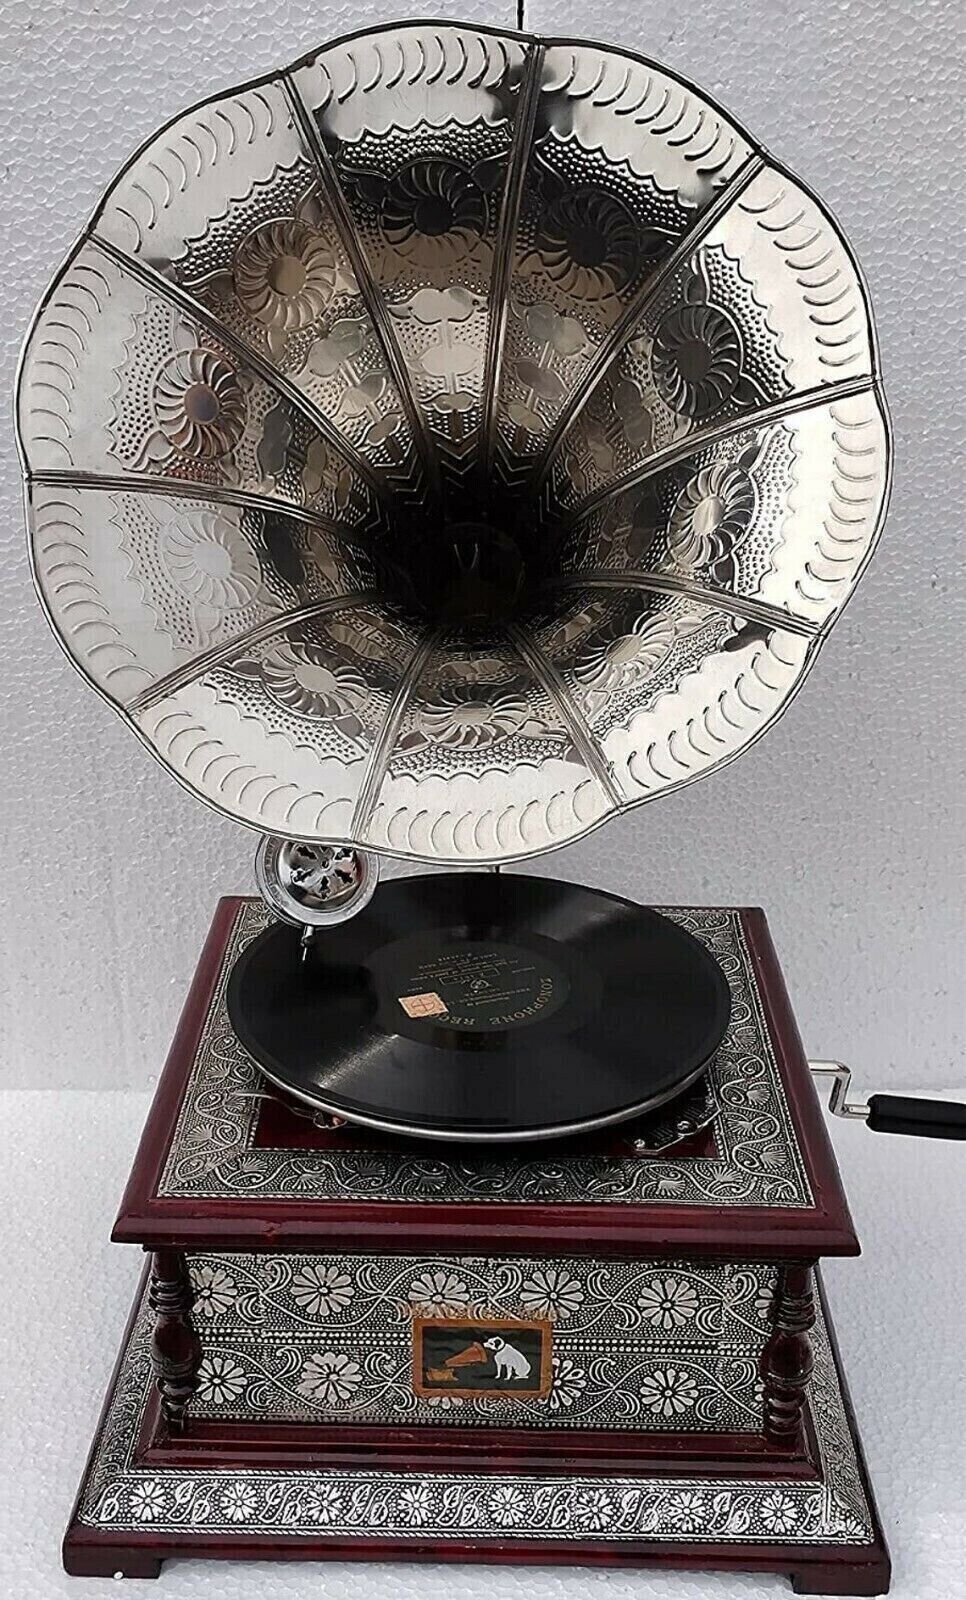 Antique look HMV Gramophone Fully Working ,Antique Design Phonograph win-up